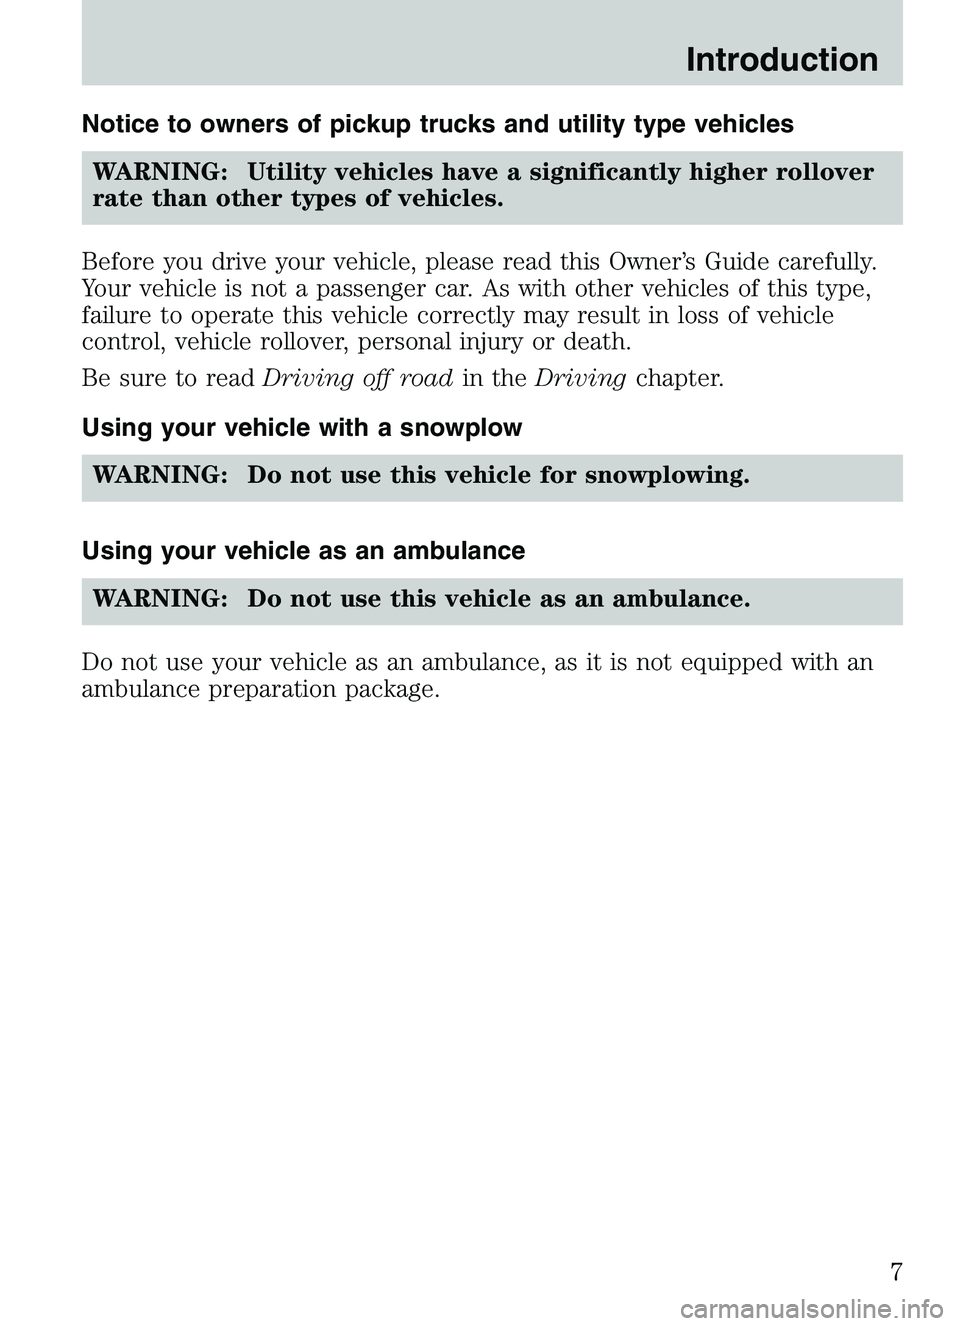 MAZDA MODEL B4000 4WD 2003  Owners Manual Notice to owners of pickup trucks and utility type vehiclesWARNING: Utility vehicles have a significantly higher rollover
rate than other types of vehicles.
Before you drive your vehicle, please read 